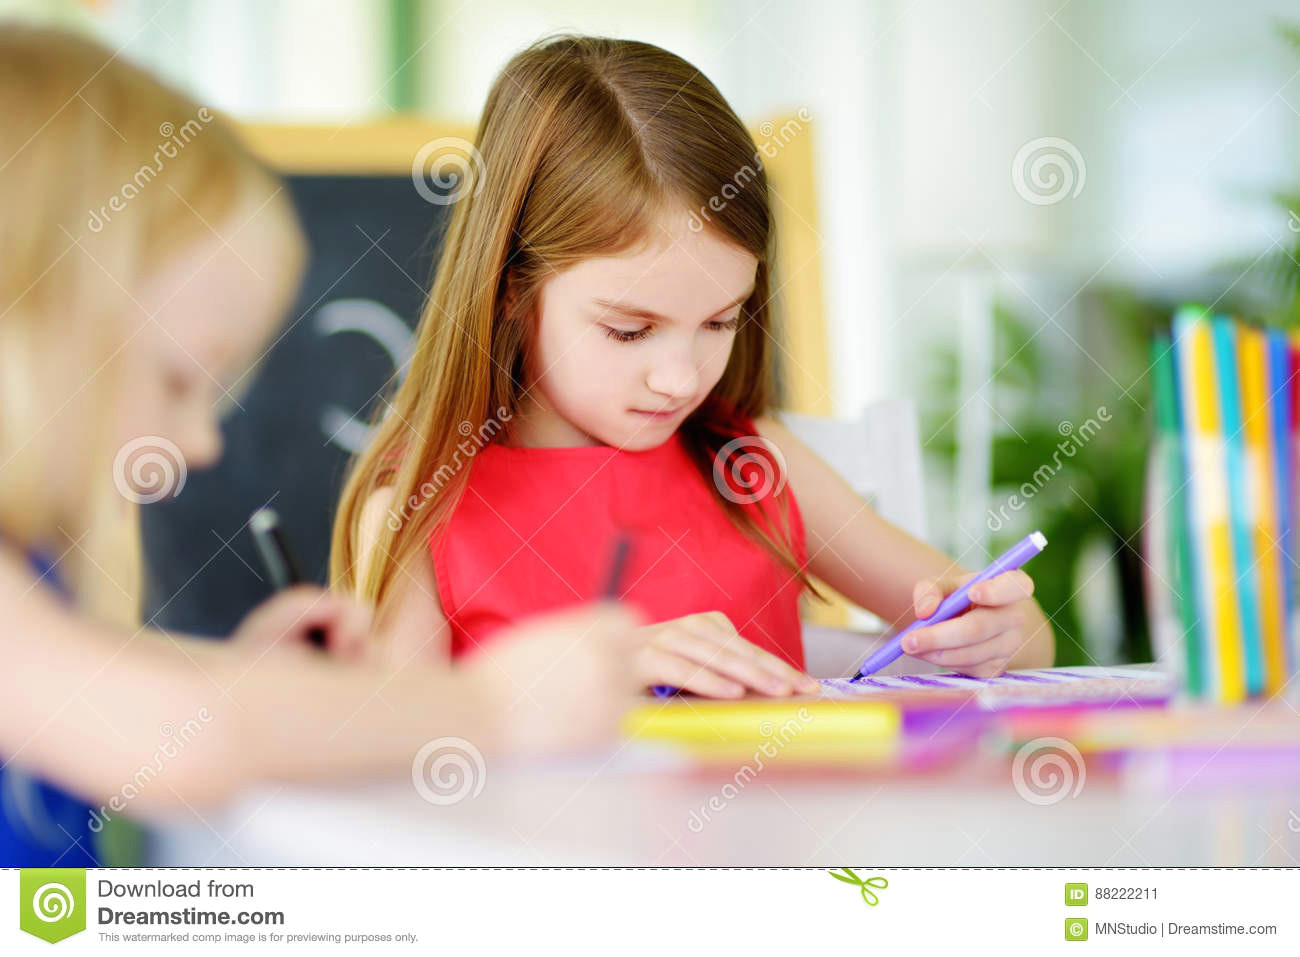 Drawing Of A Girl Sitting at A Desk Two Cute Little Sisters Drawing with Colorful Pencils at A Daycare